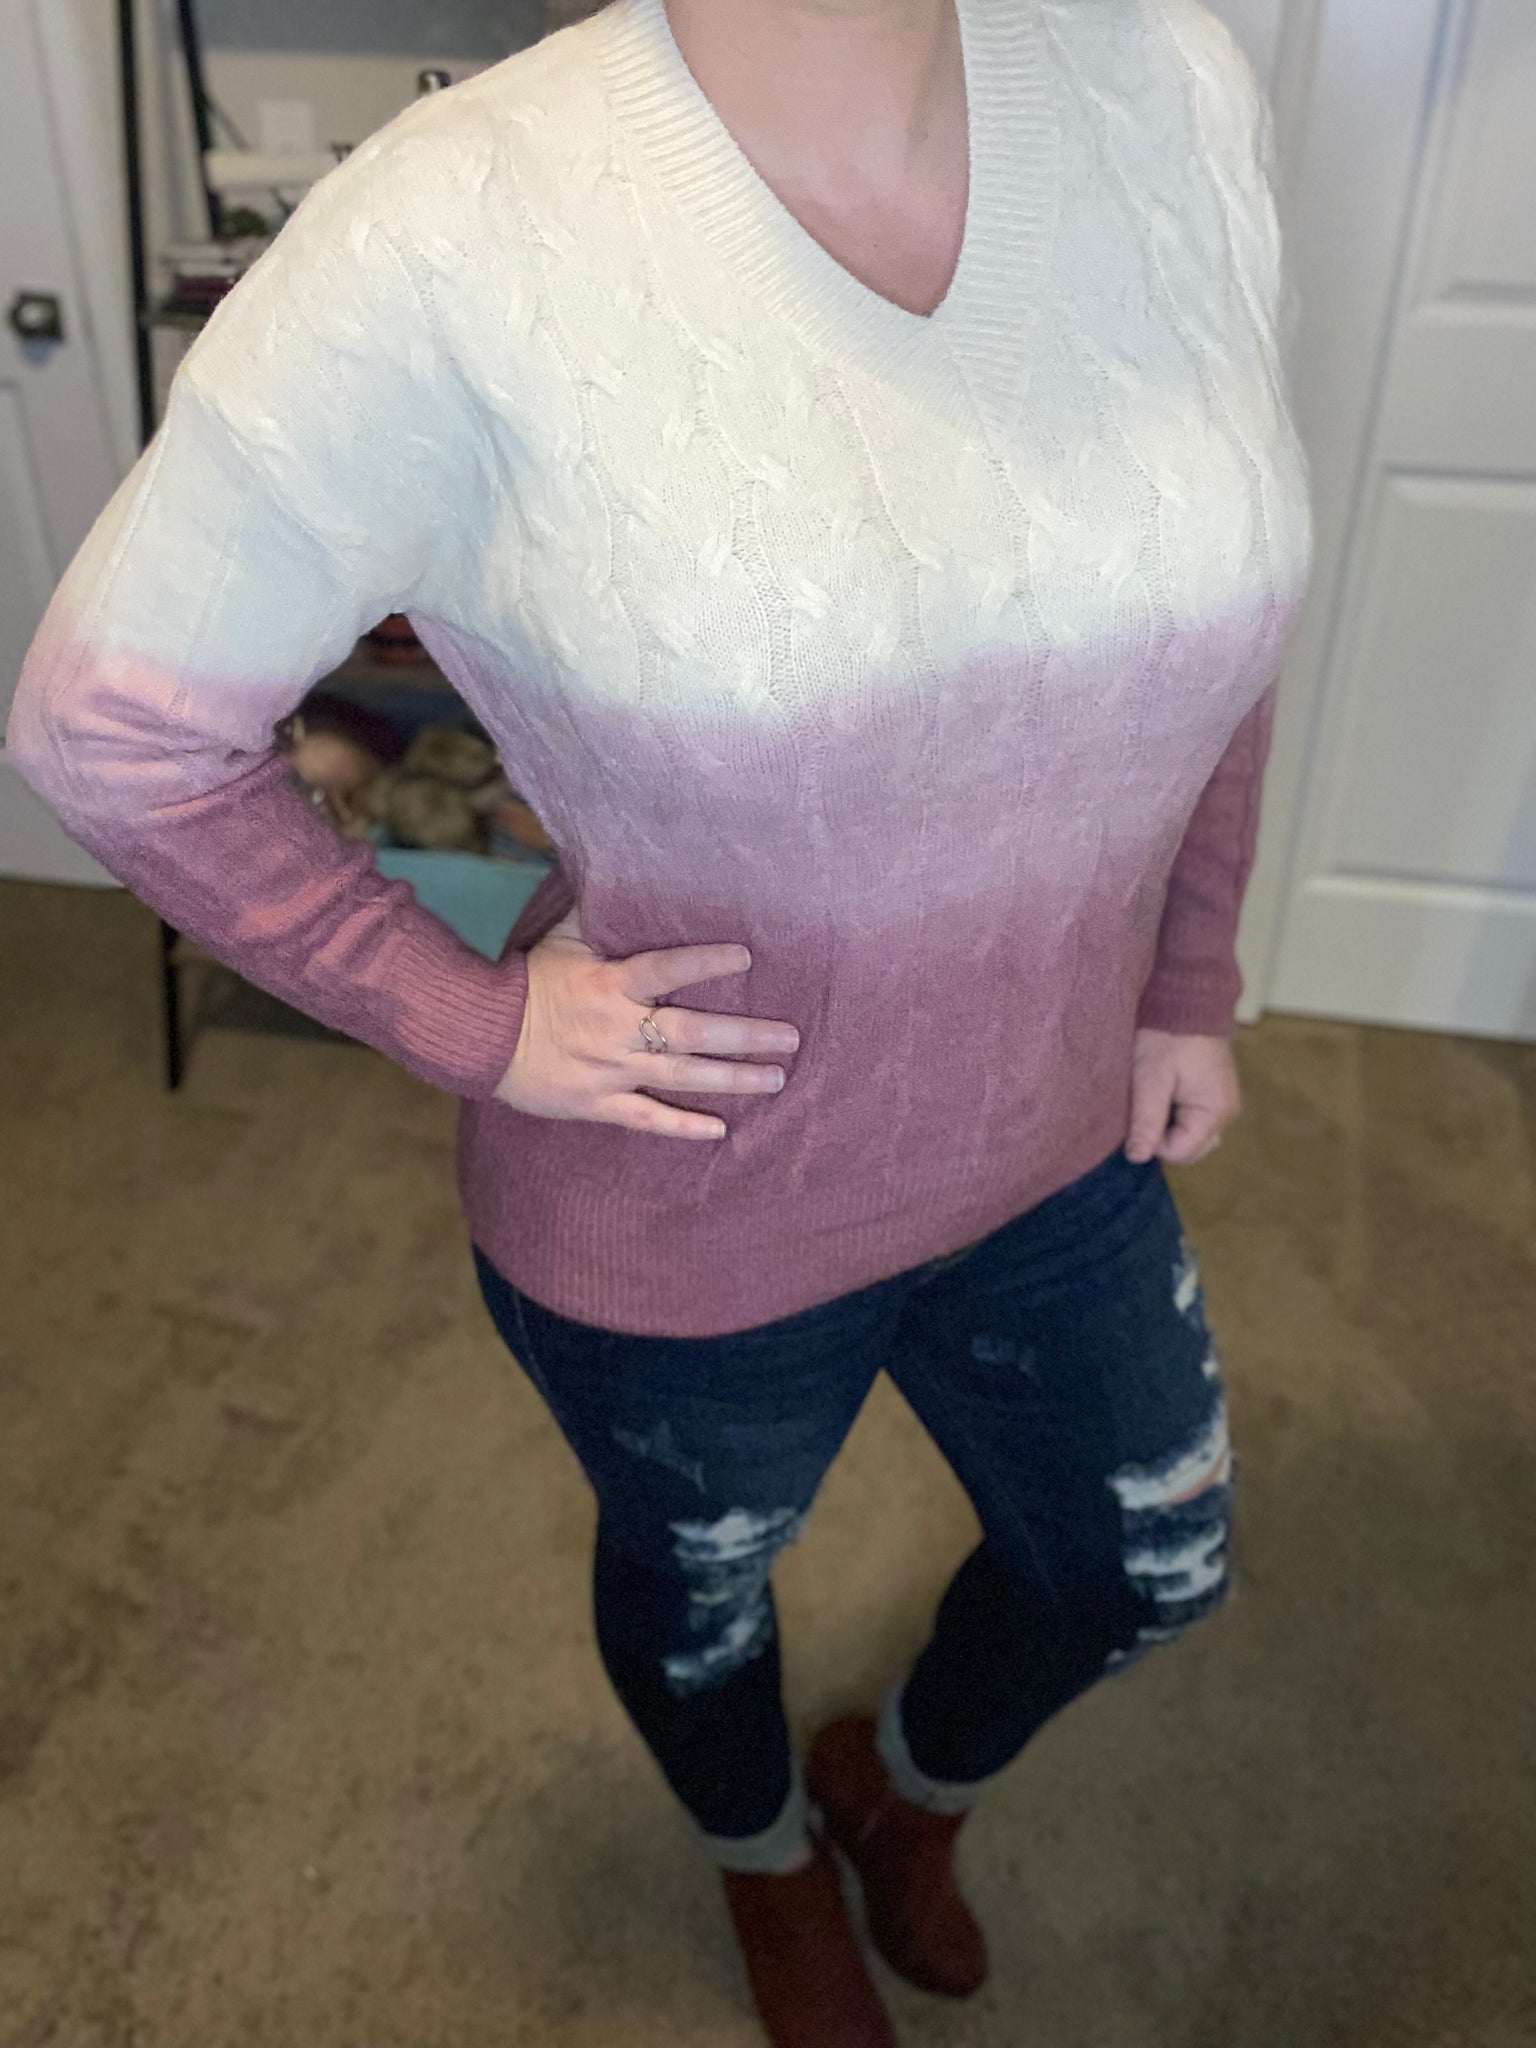 Mauve Ombre Cable Knit Sweater